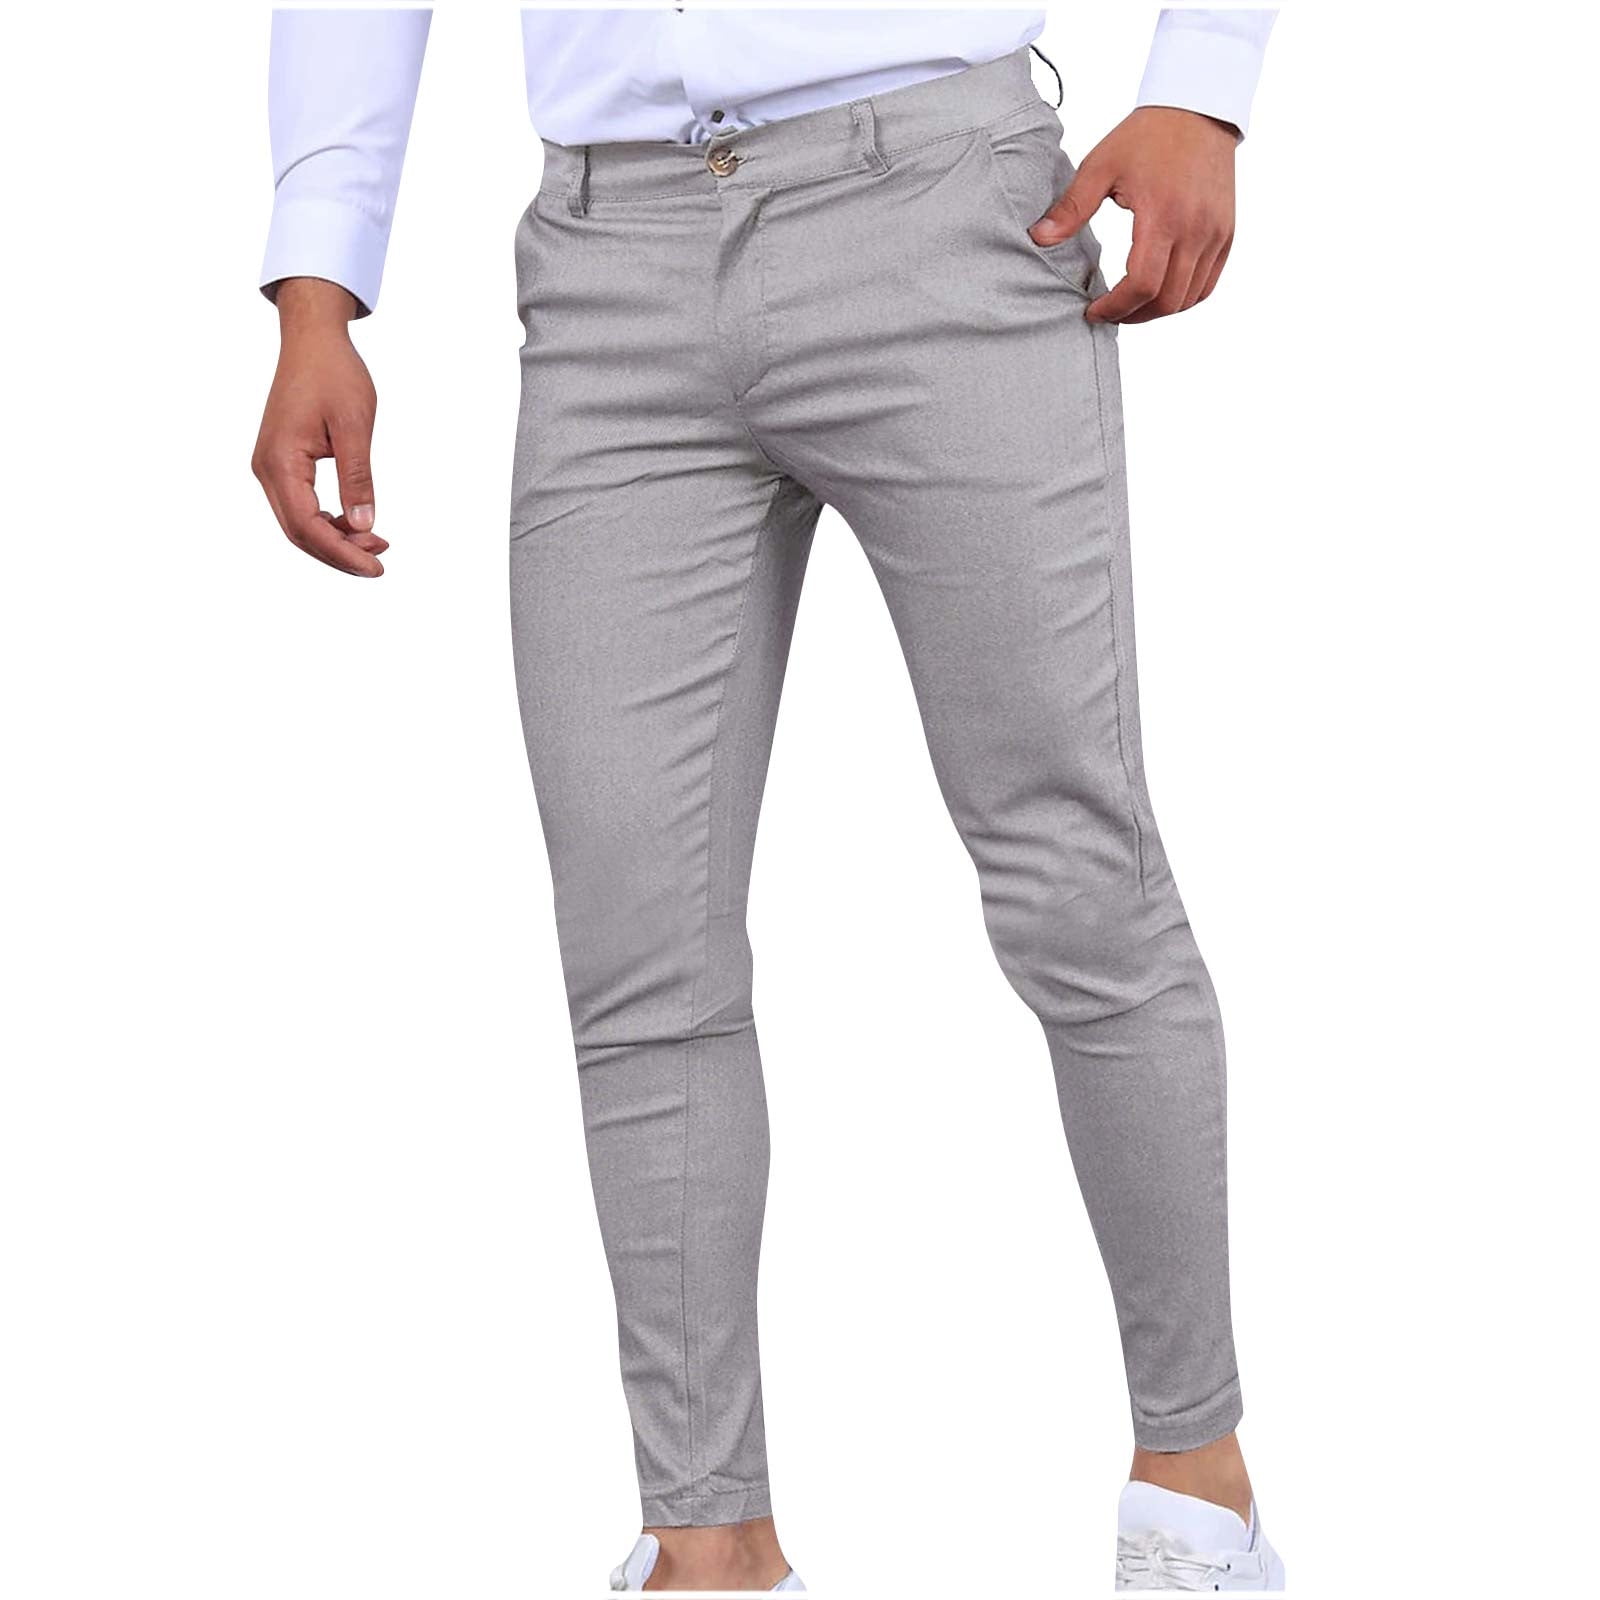 Mens Chinos Dress Pants Slim Fit Stretch Flat-Front Golf Pants Casual ...